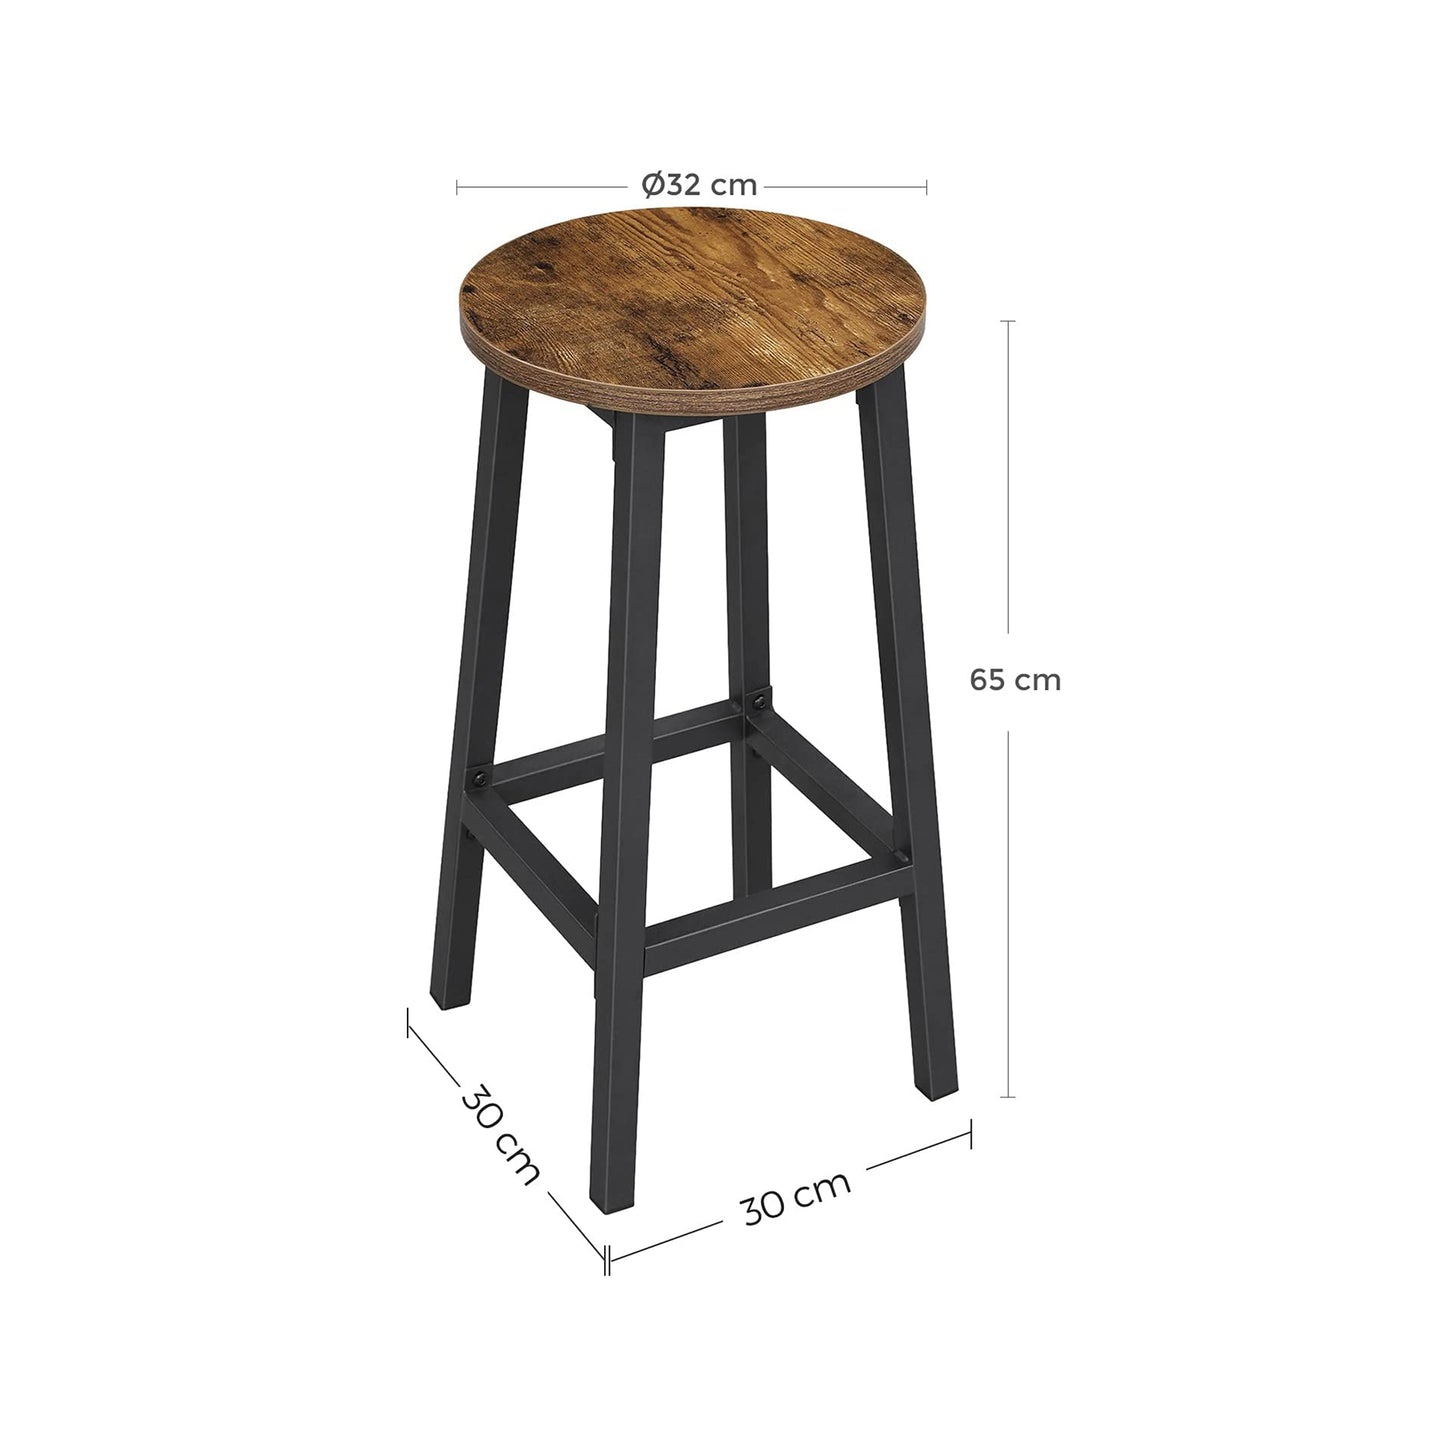 Set of 2 Bar Stools, Tall Kitchen Stools, Sturdy Steel Frame, 65 cm Tall, Easy Assembly, Rustic Brown and Black, VASAGLE, 6